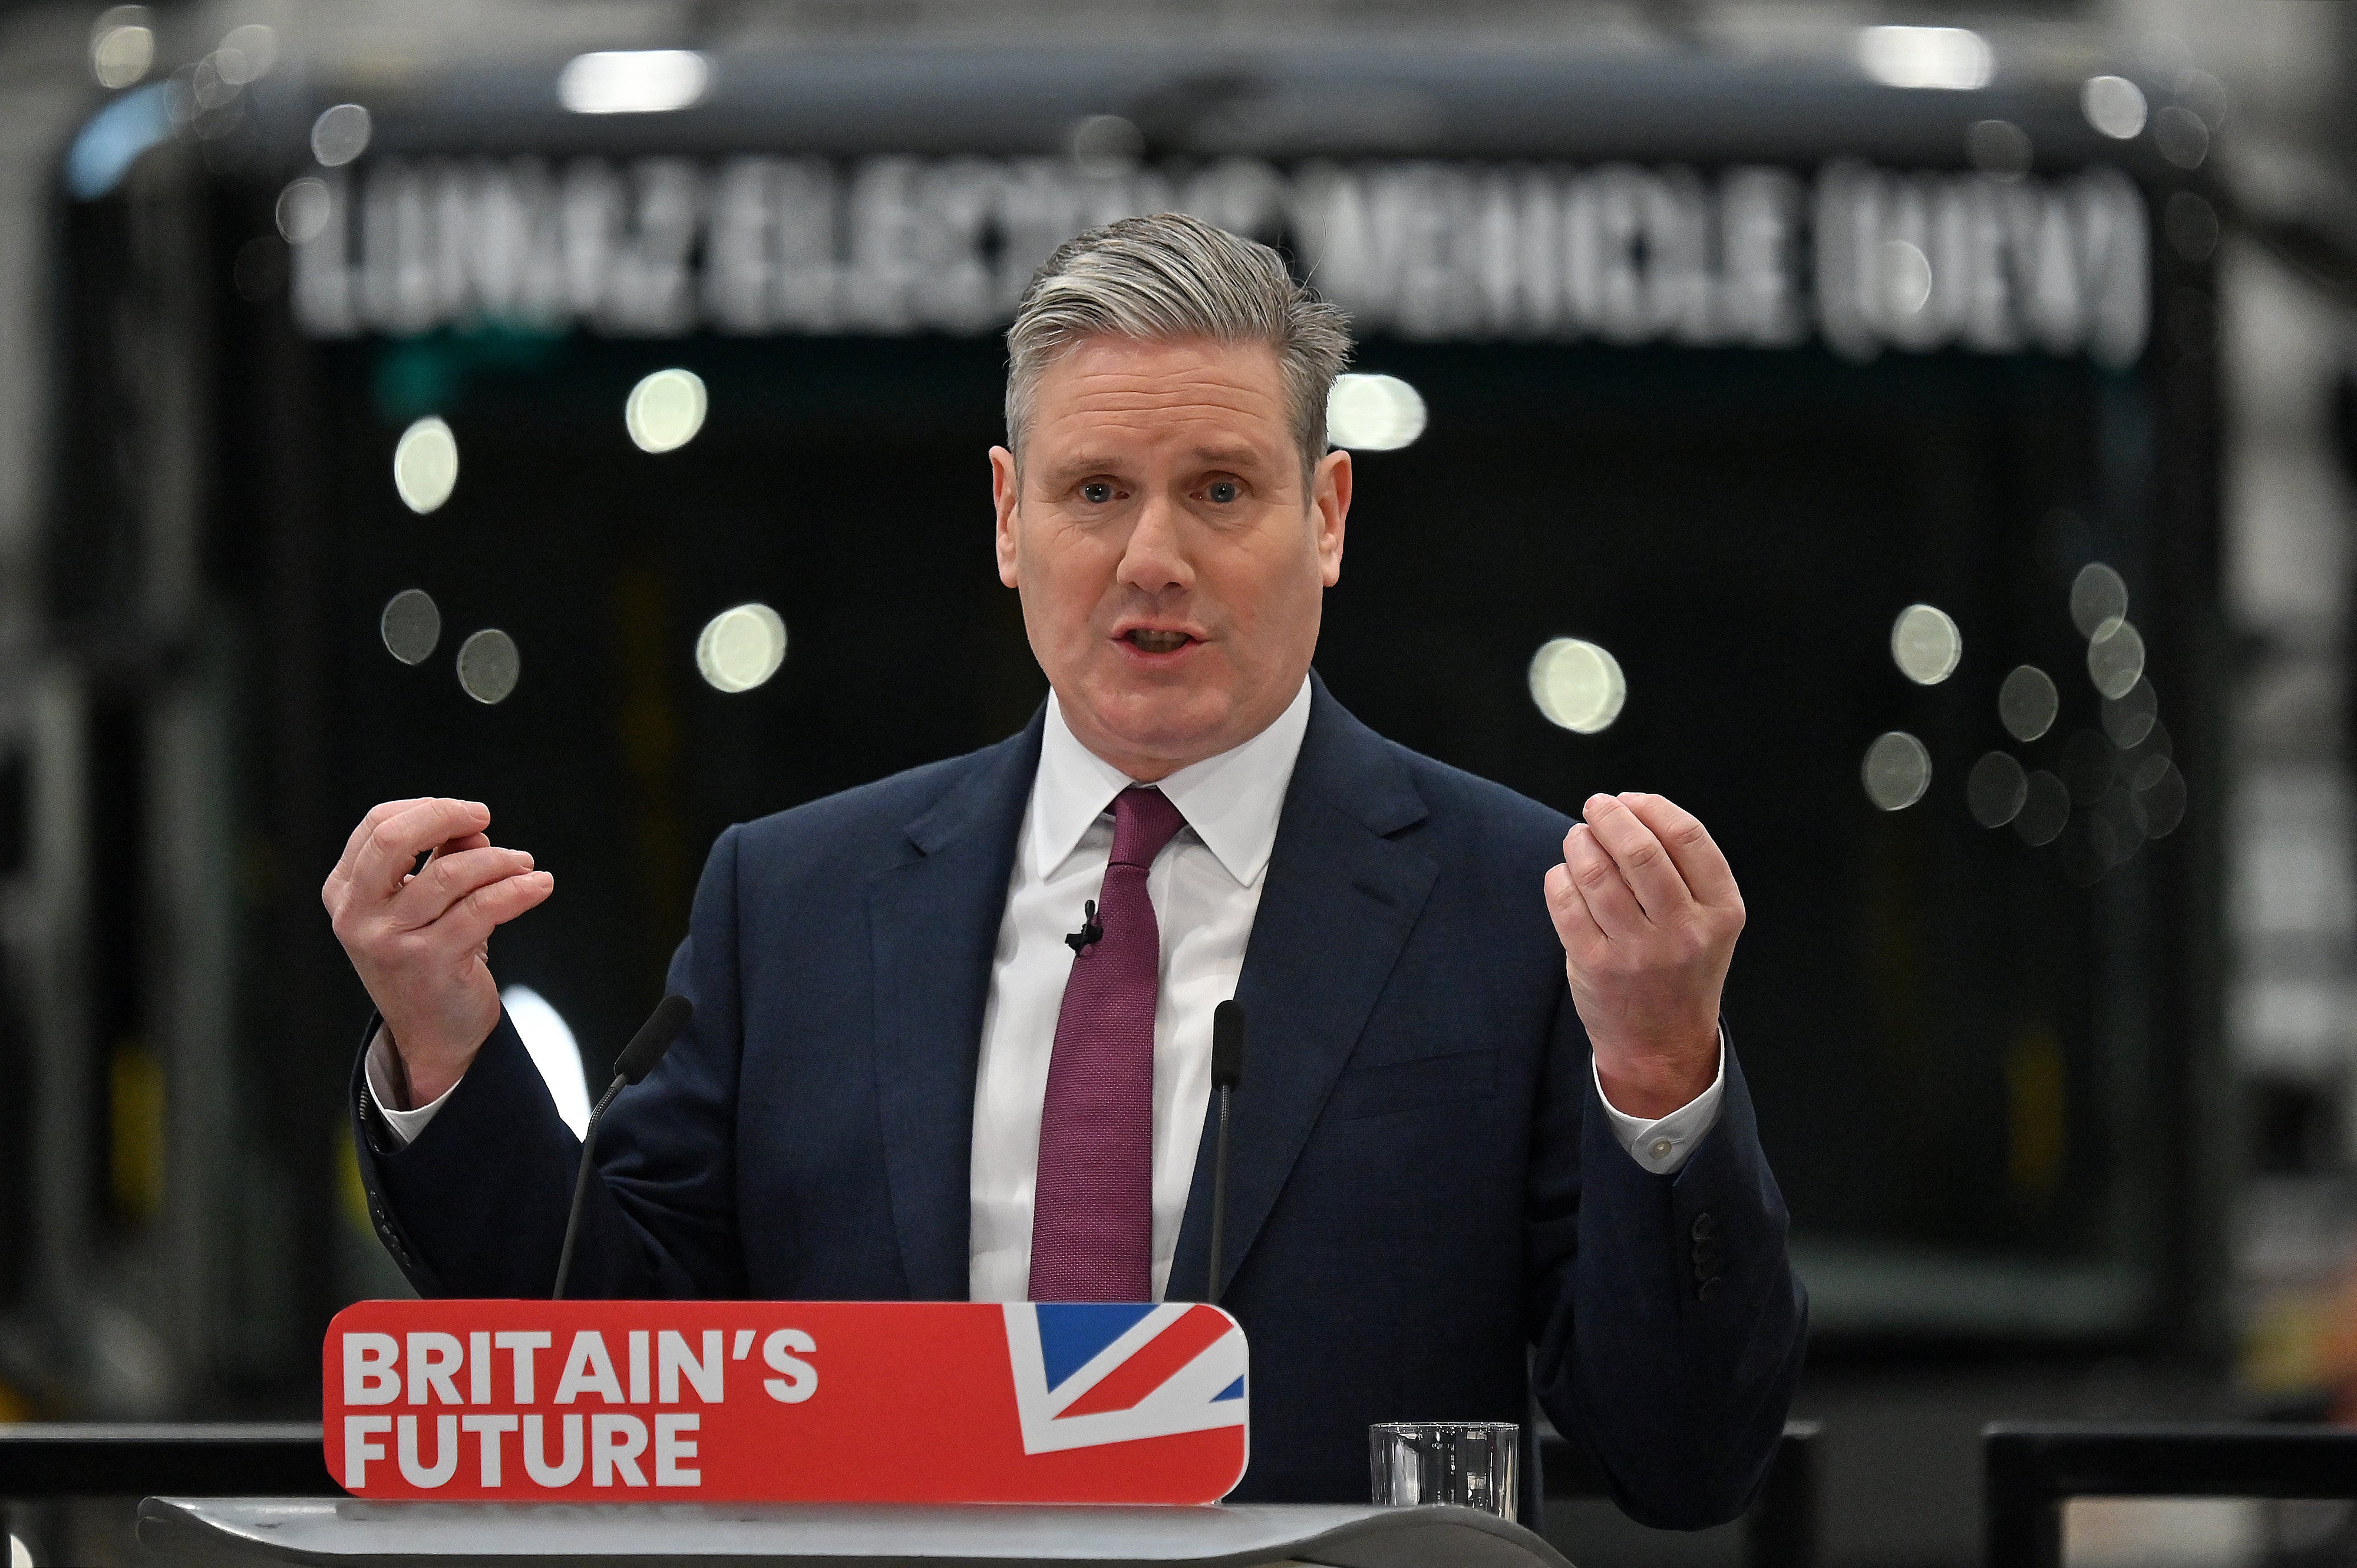 Keir Starmer delivering his speech in Milton Keynes on Tuesday